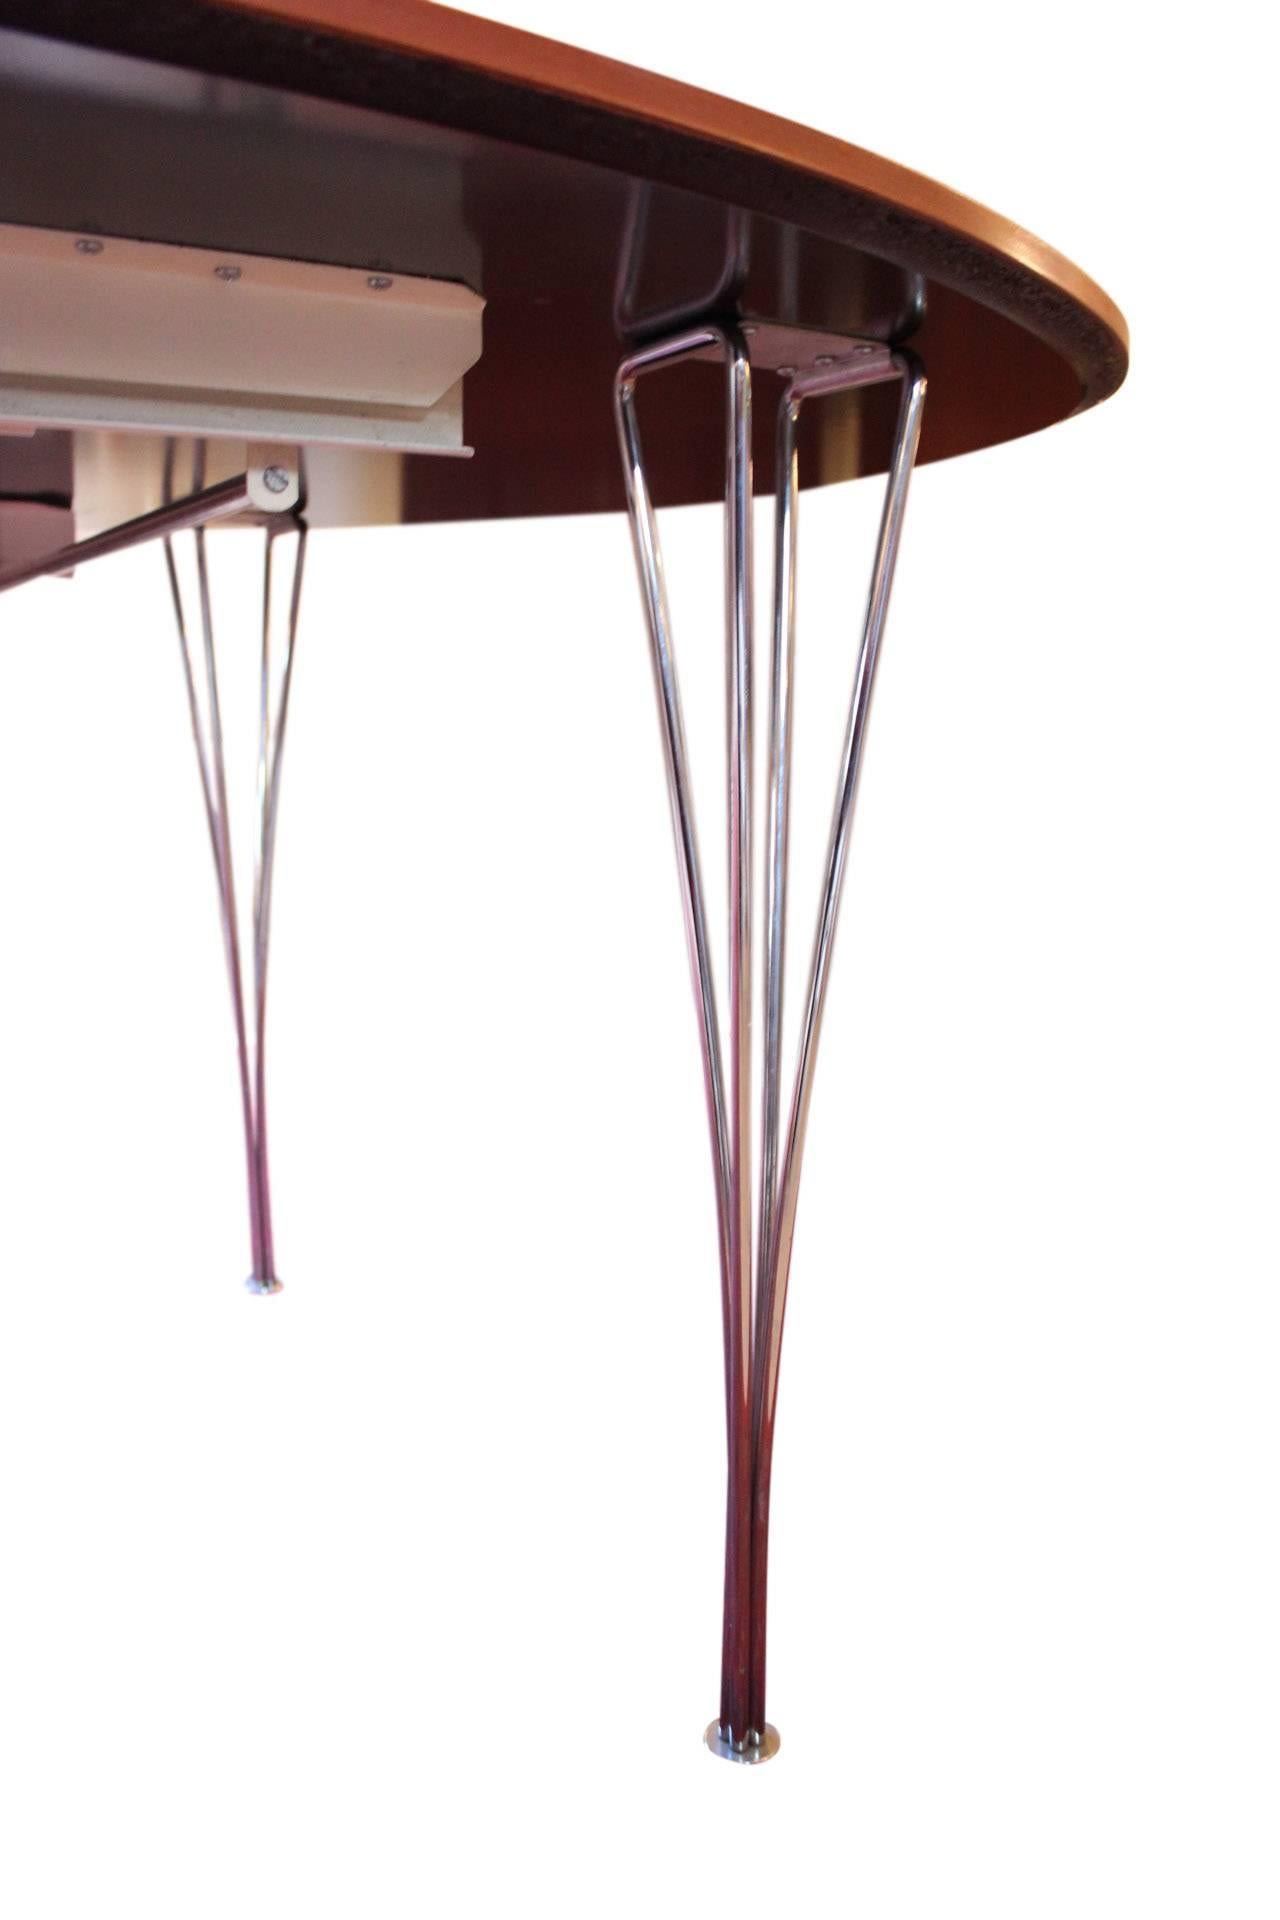 Chrome Super Ellipse Table in Rosewood by Piet Hein, Arne Jacobsen and Bruno Mathsson